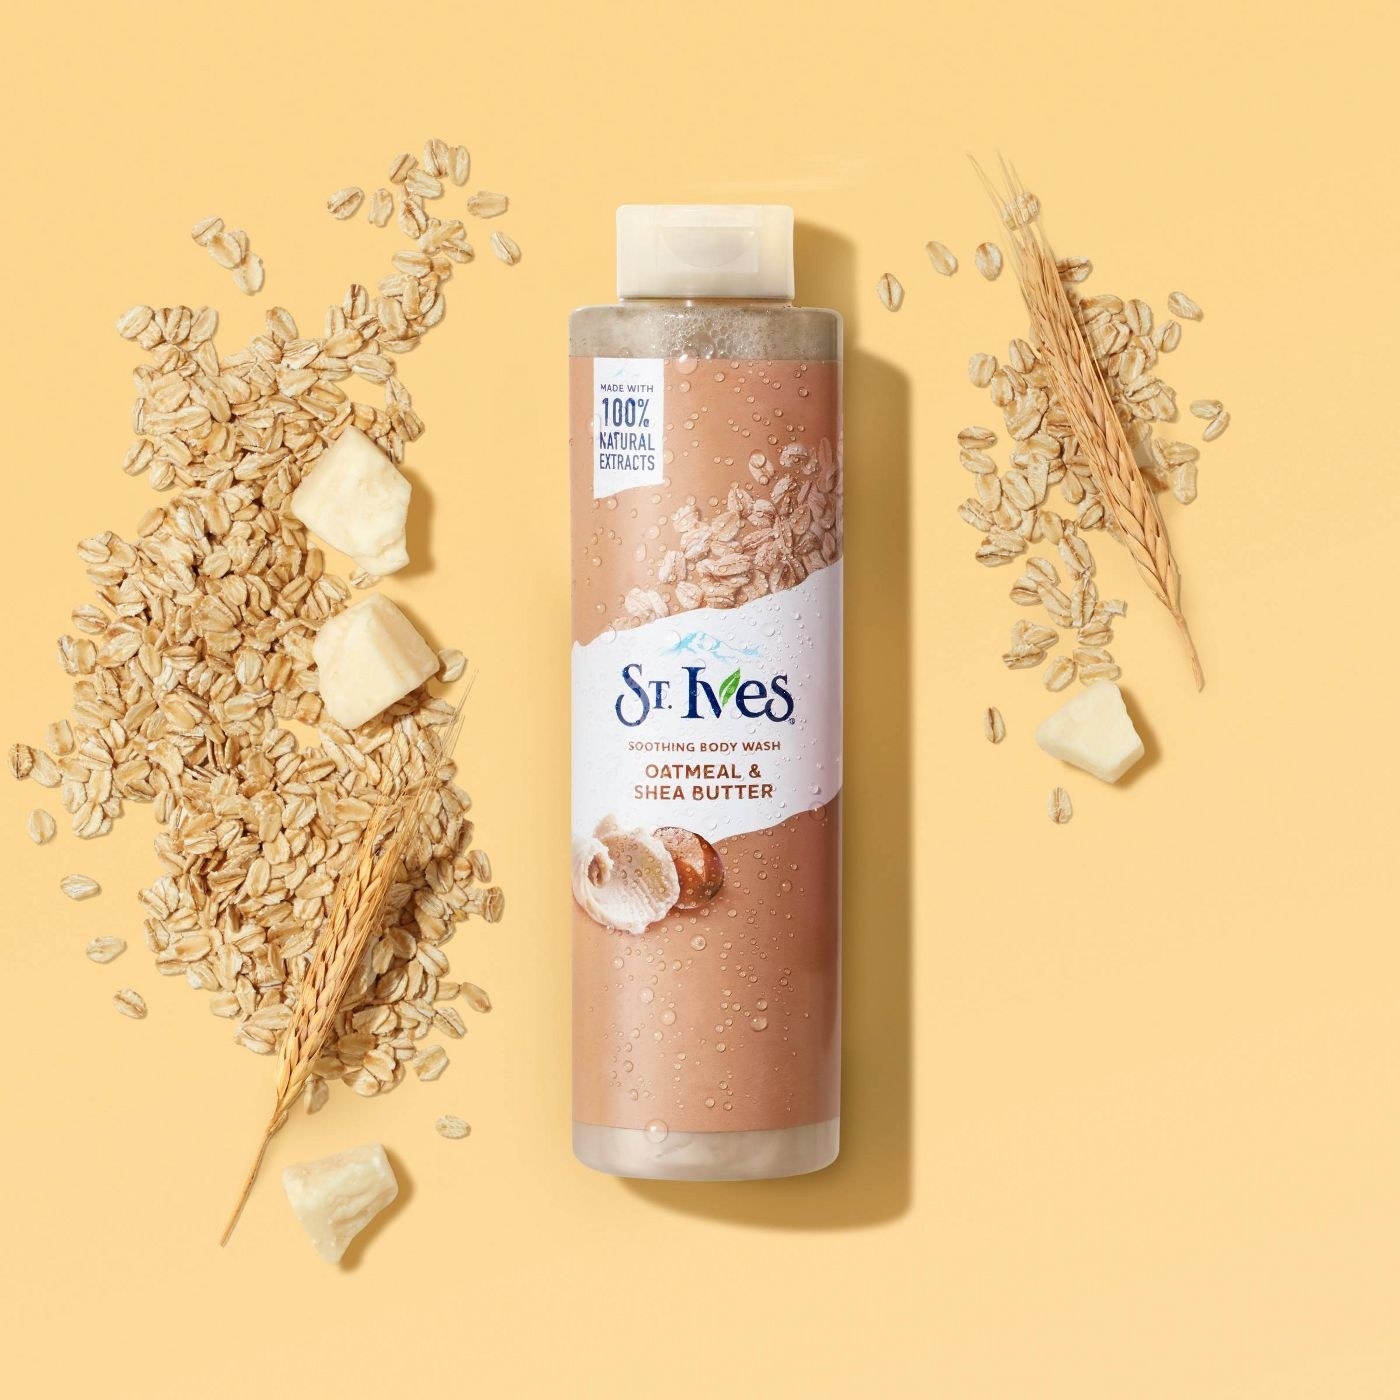 The St. Ives oatmeal &amp;amp; shea butter body wash